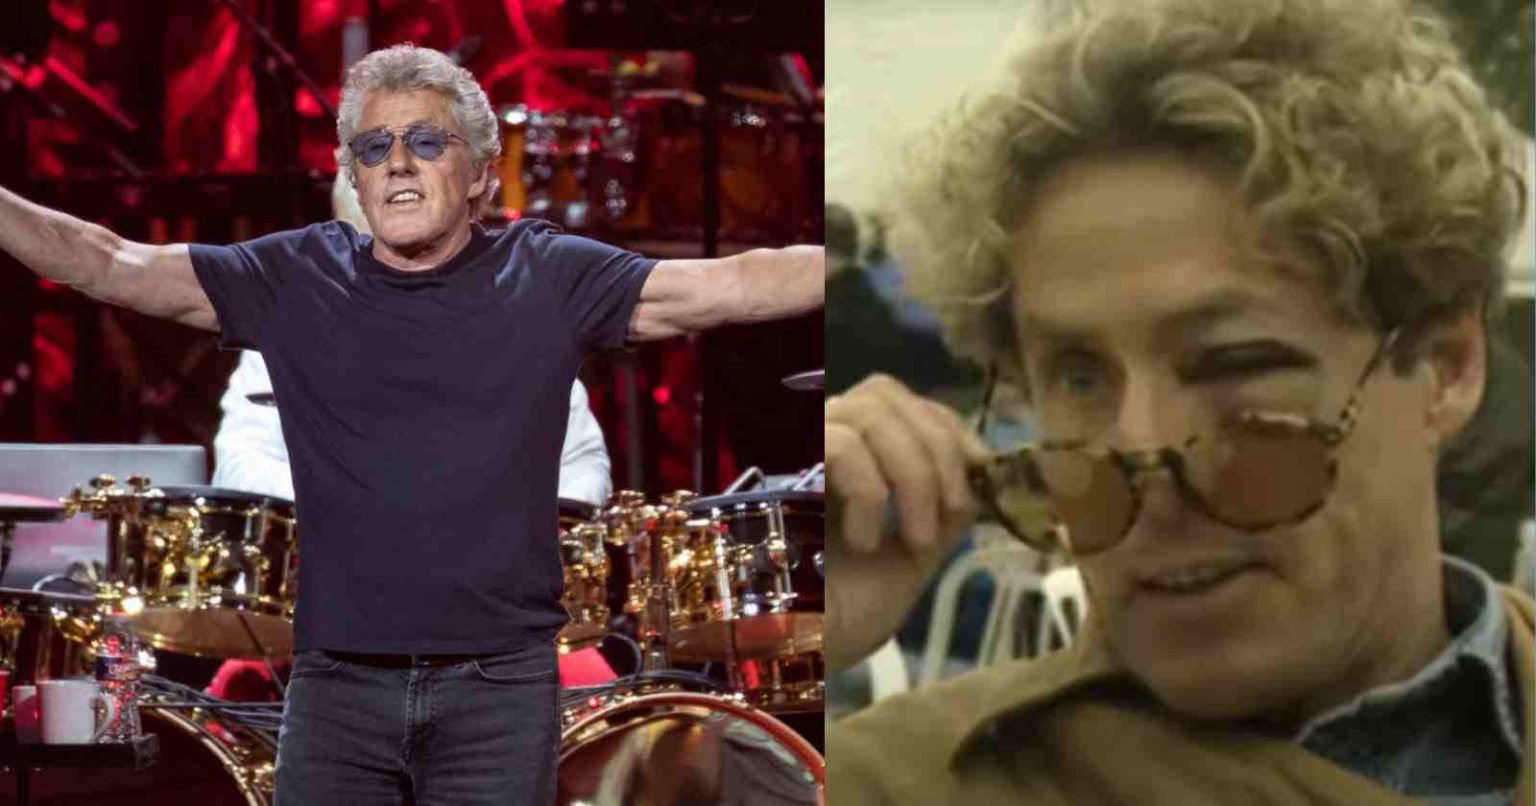 When The Who's Roger Daltrey was almost killed by Gary Glitter on stage